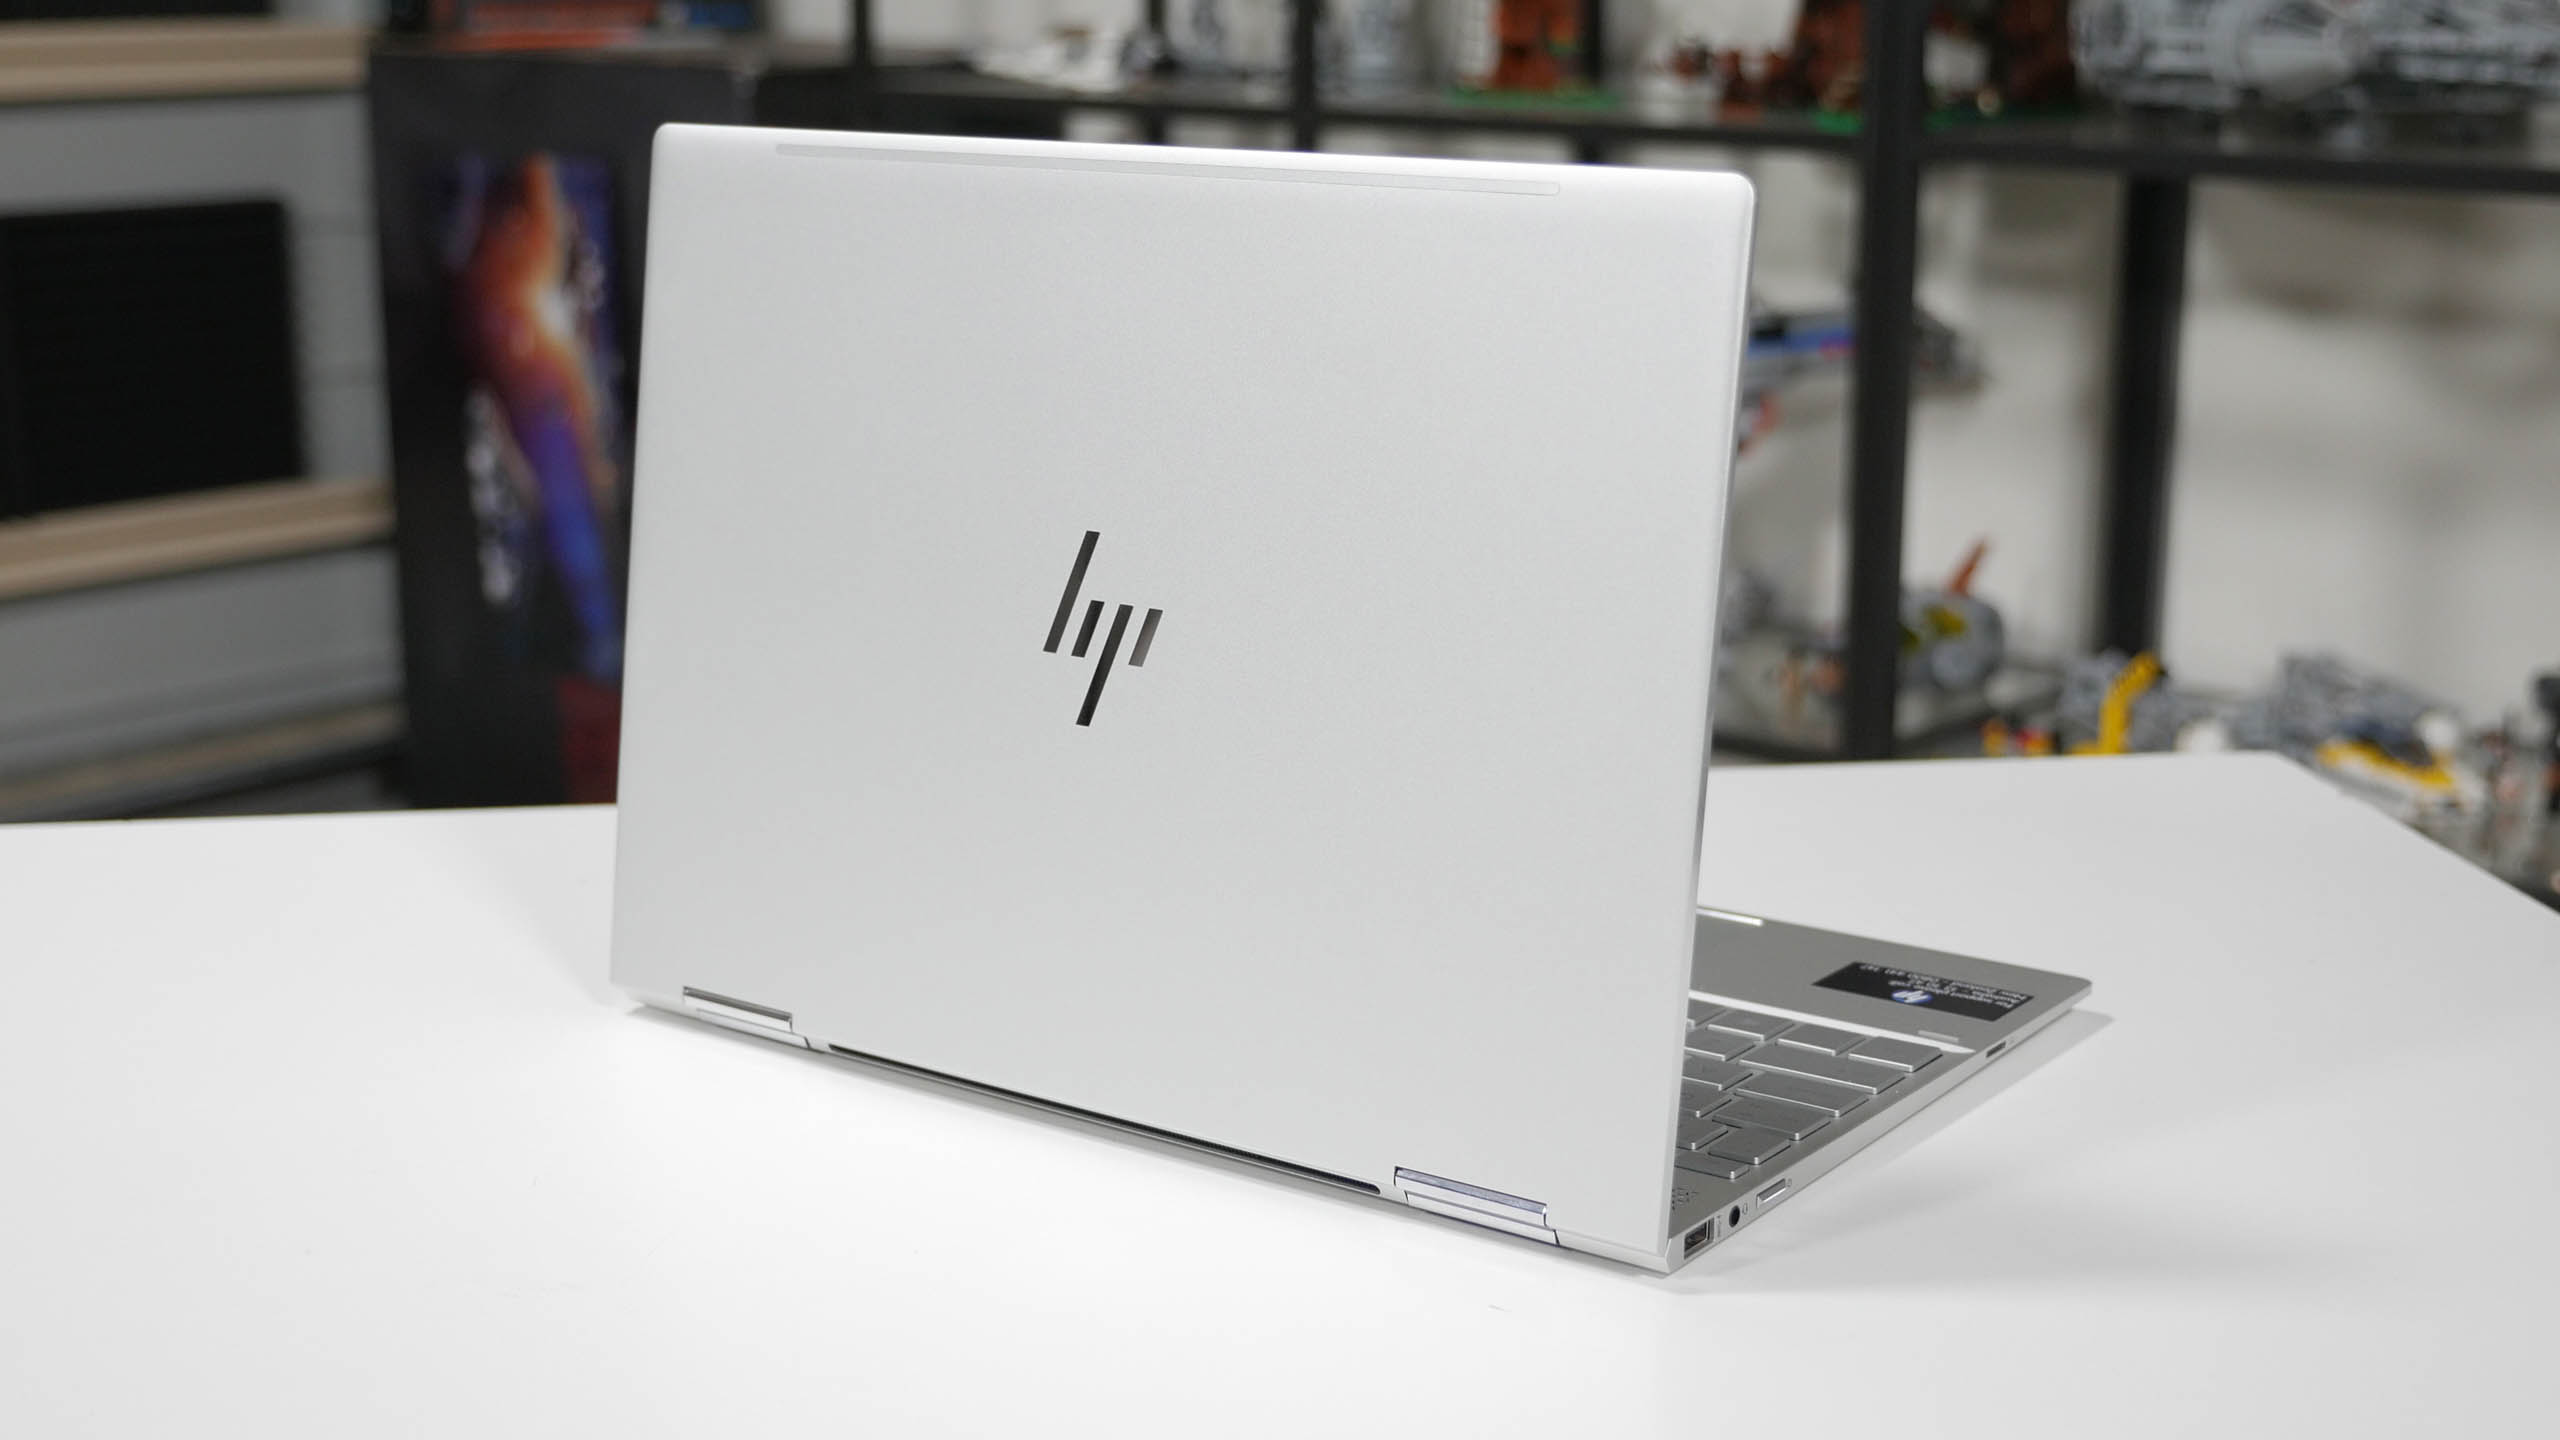 HP's Labor Day Sale is live: great deals on laptops, monitors, printers, and more